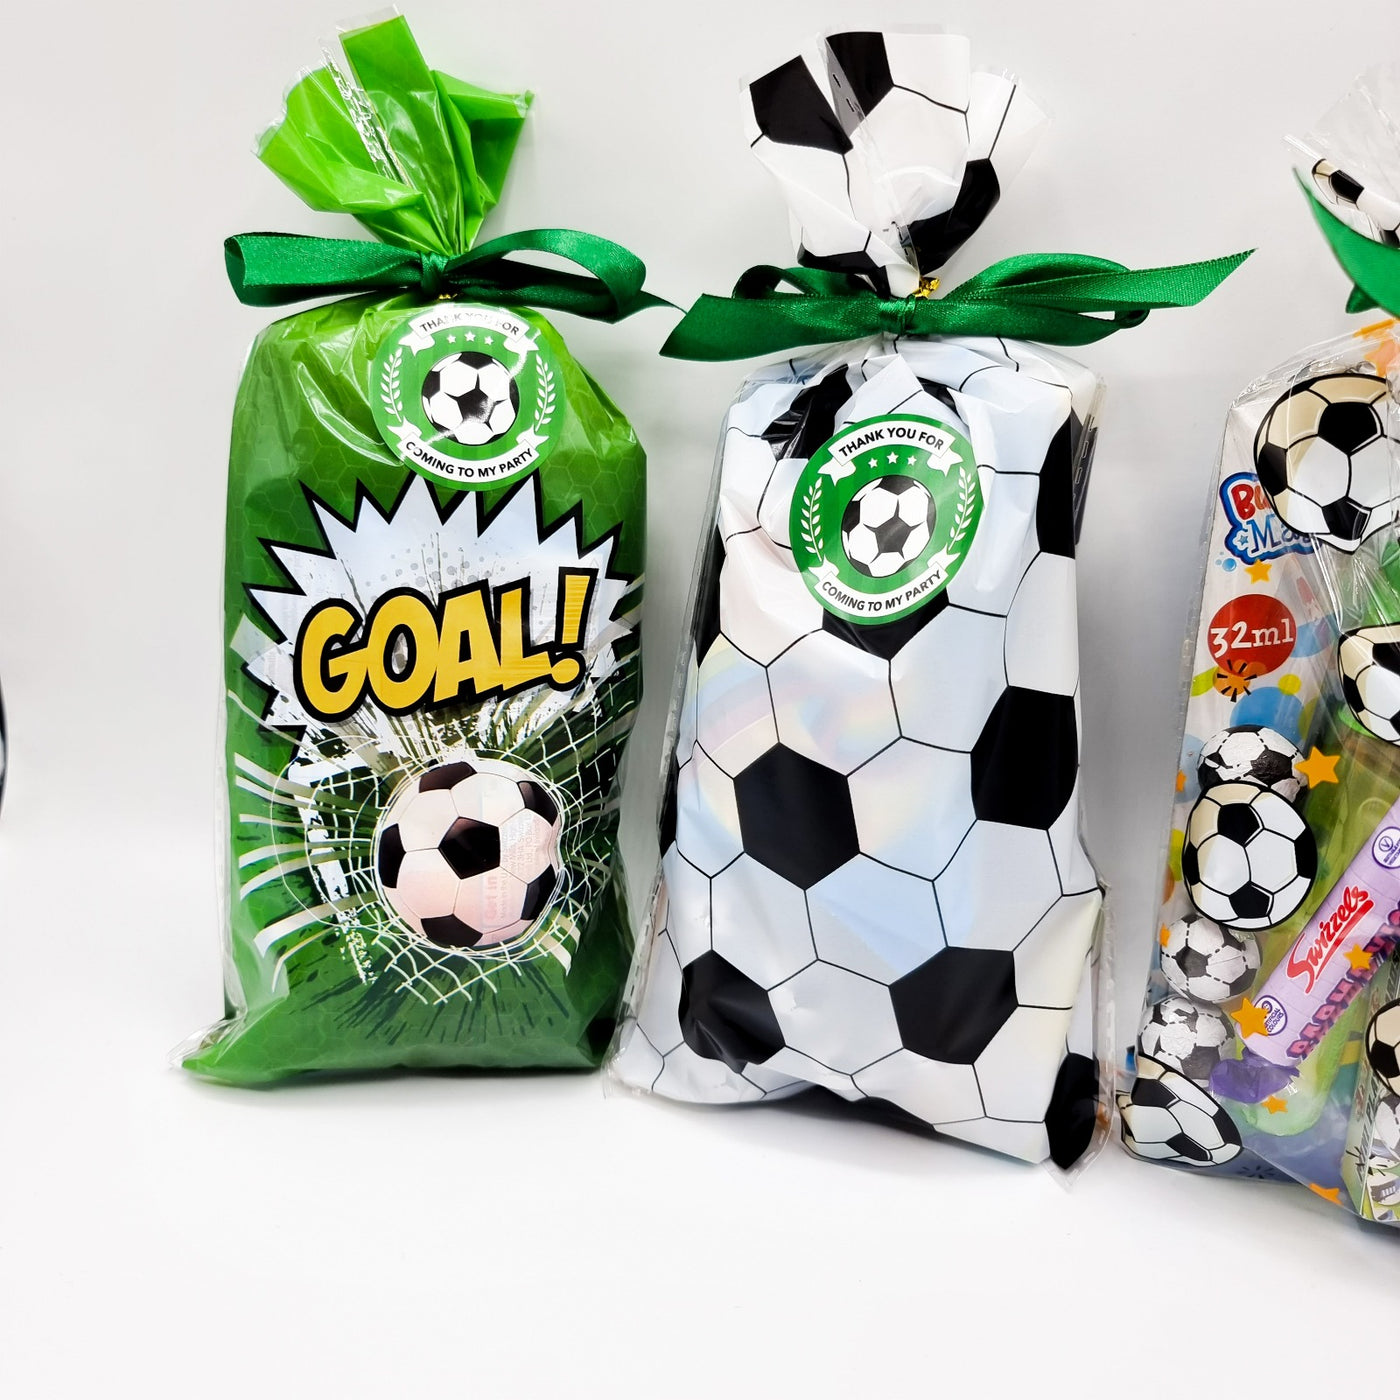 Pre-filled Football Party Bags For Boys And Girls With Vegan Sweets And Toys.